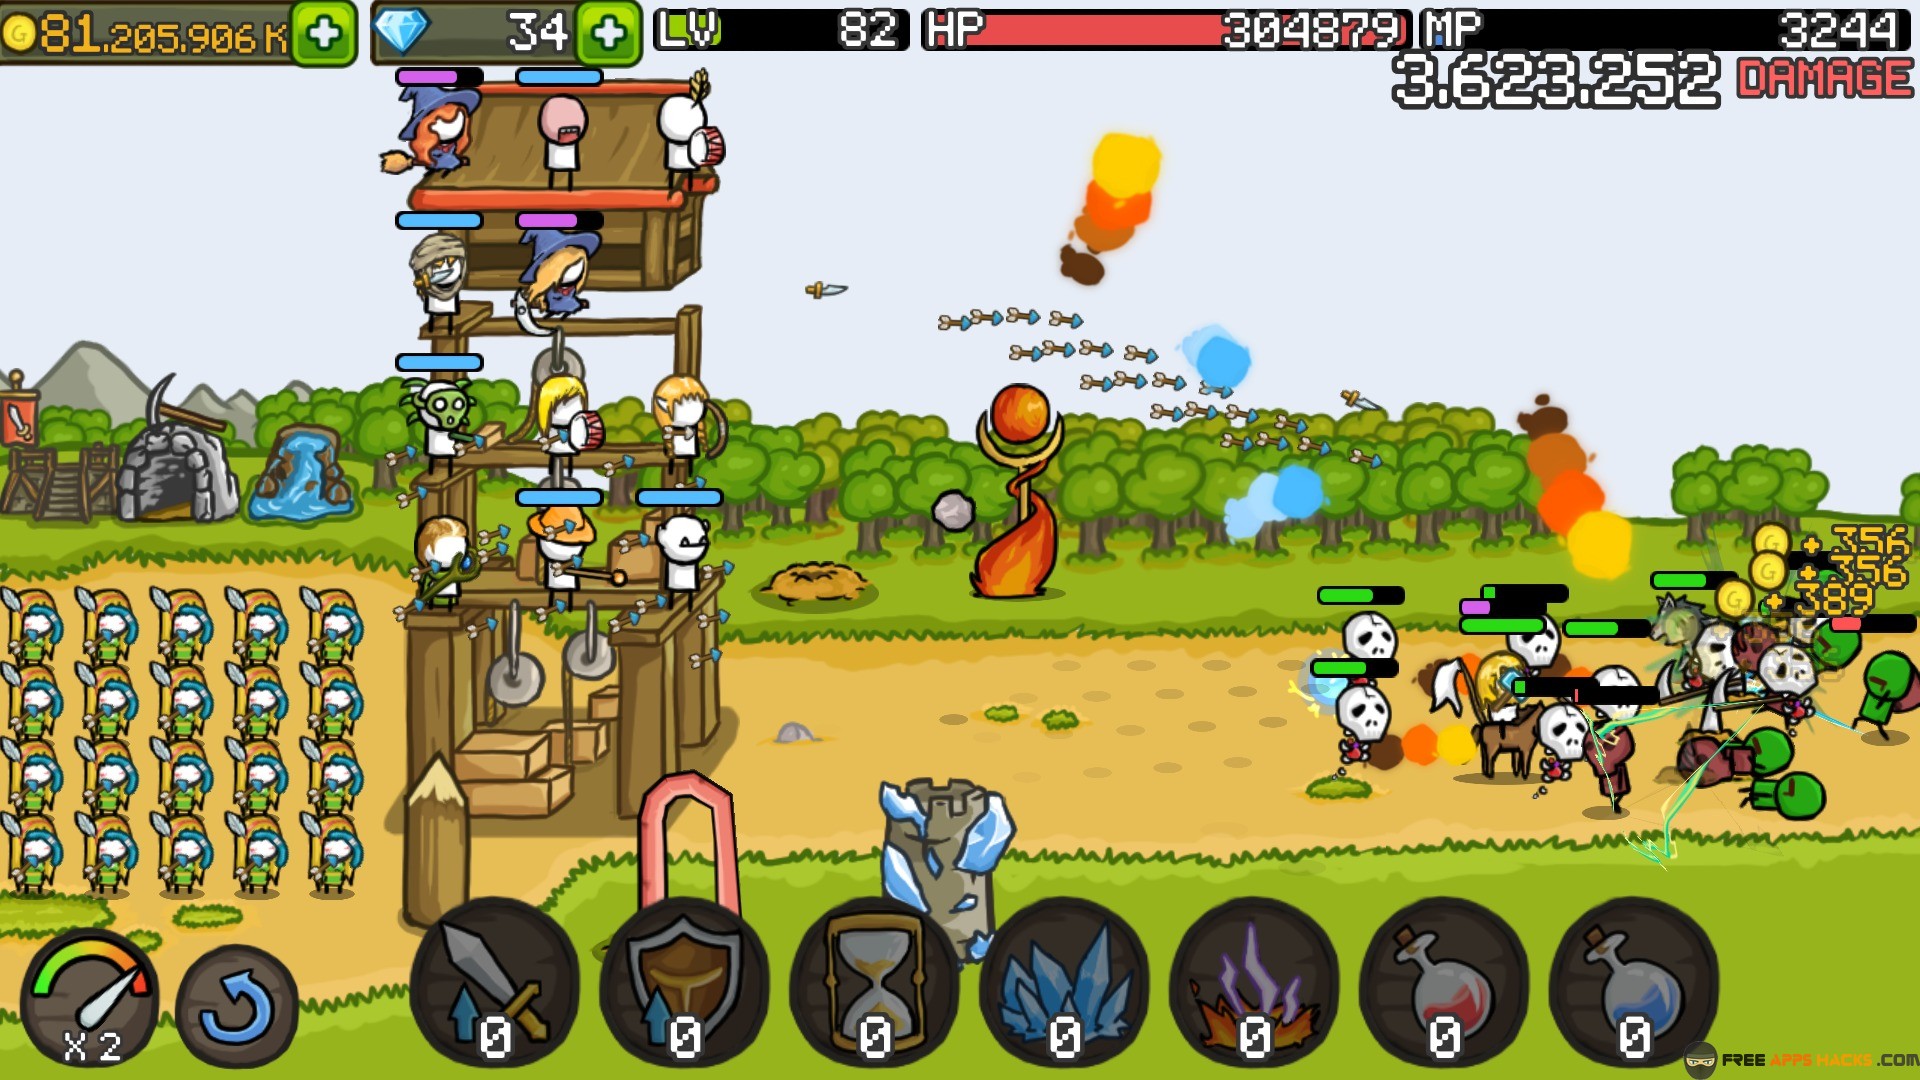 grow castle mod apk max level and unlimited money